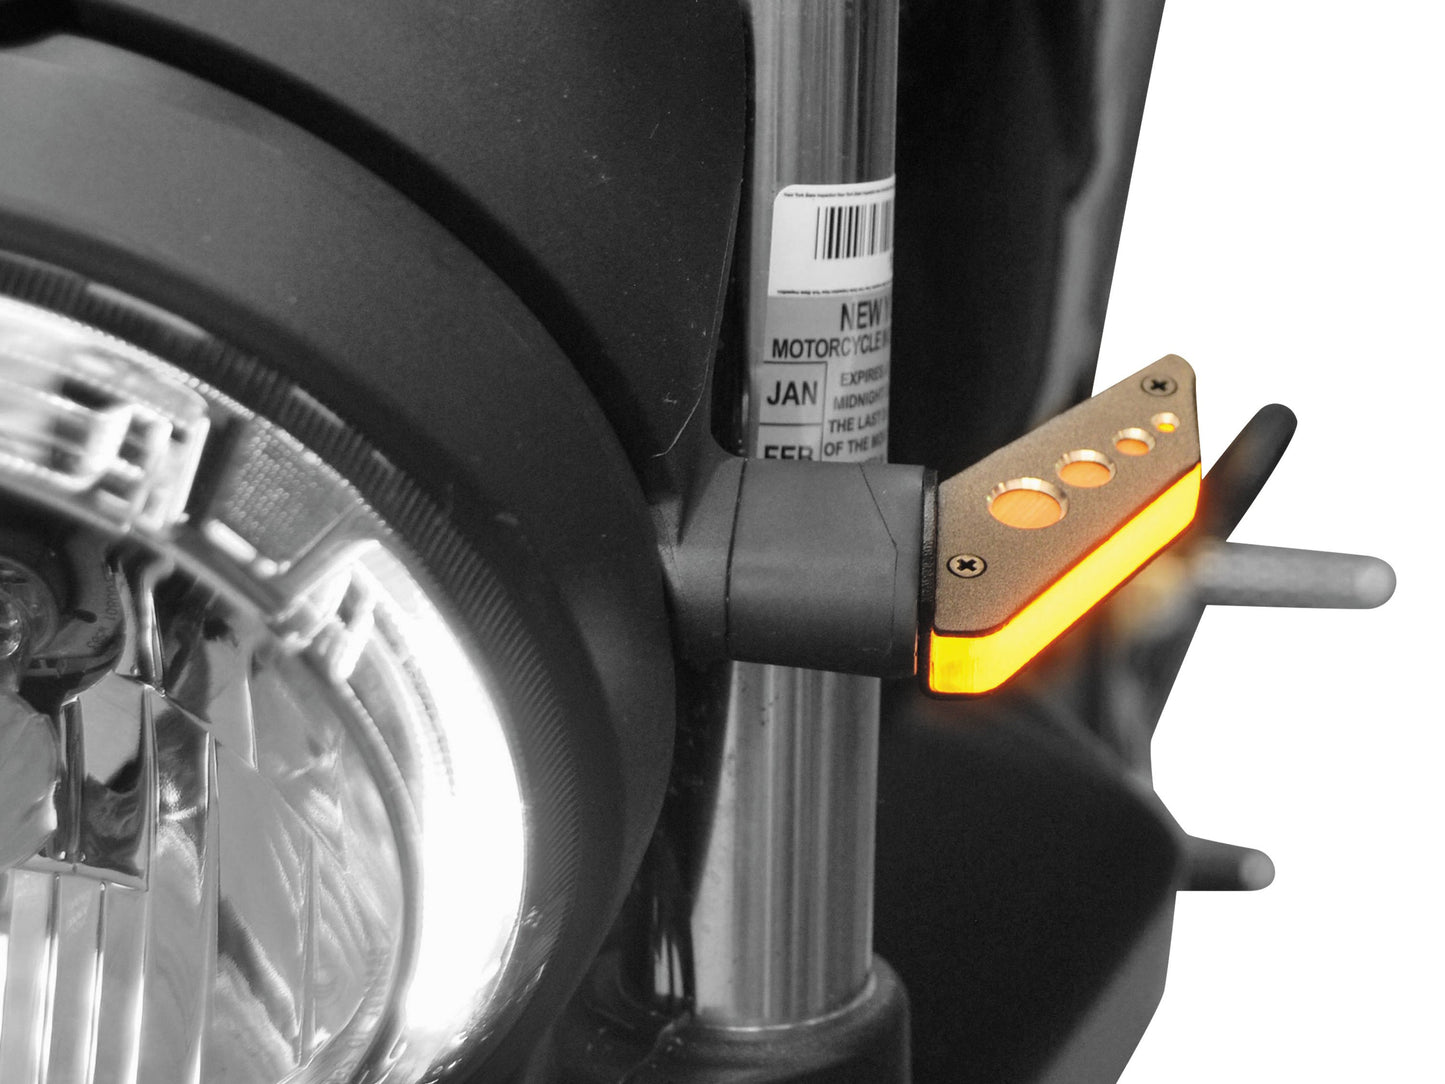 NEW RAGE CYCLES Ducati Scrambler LED Front Turn Signals